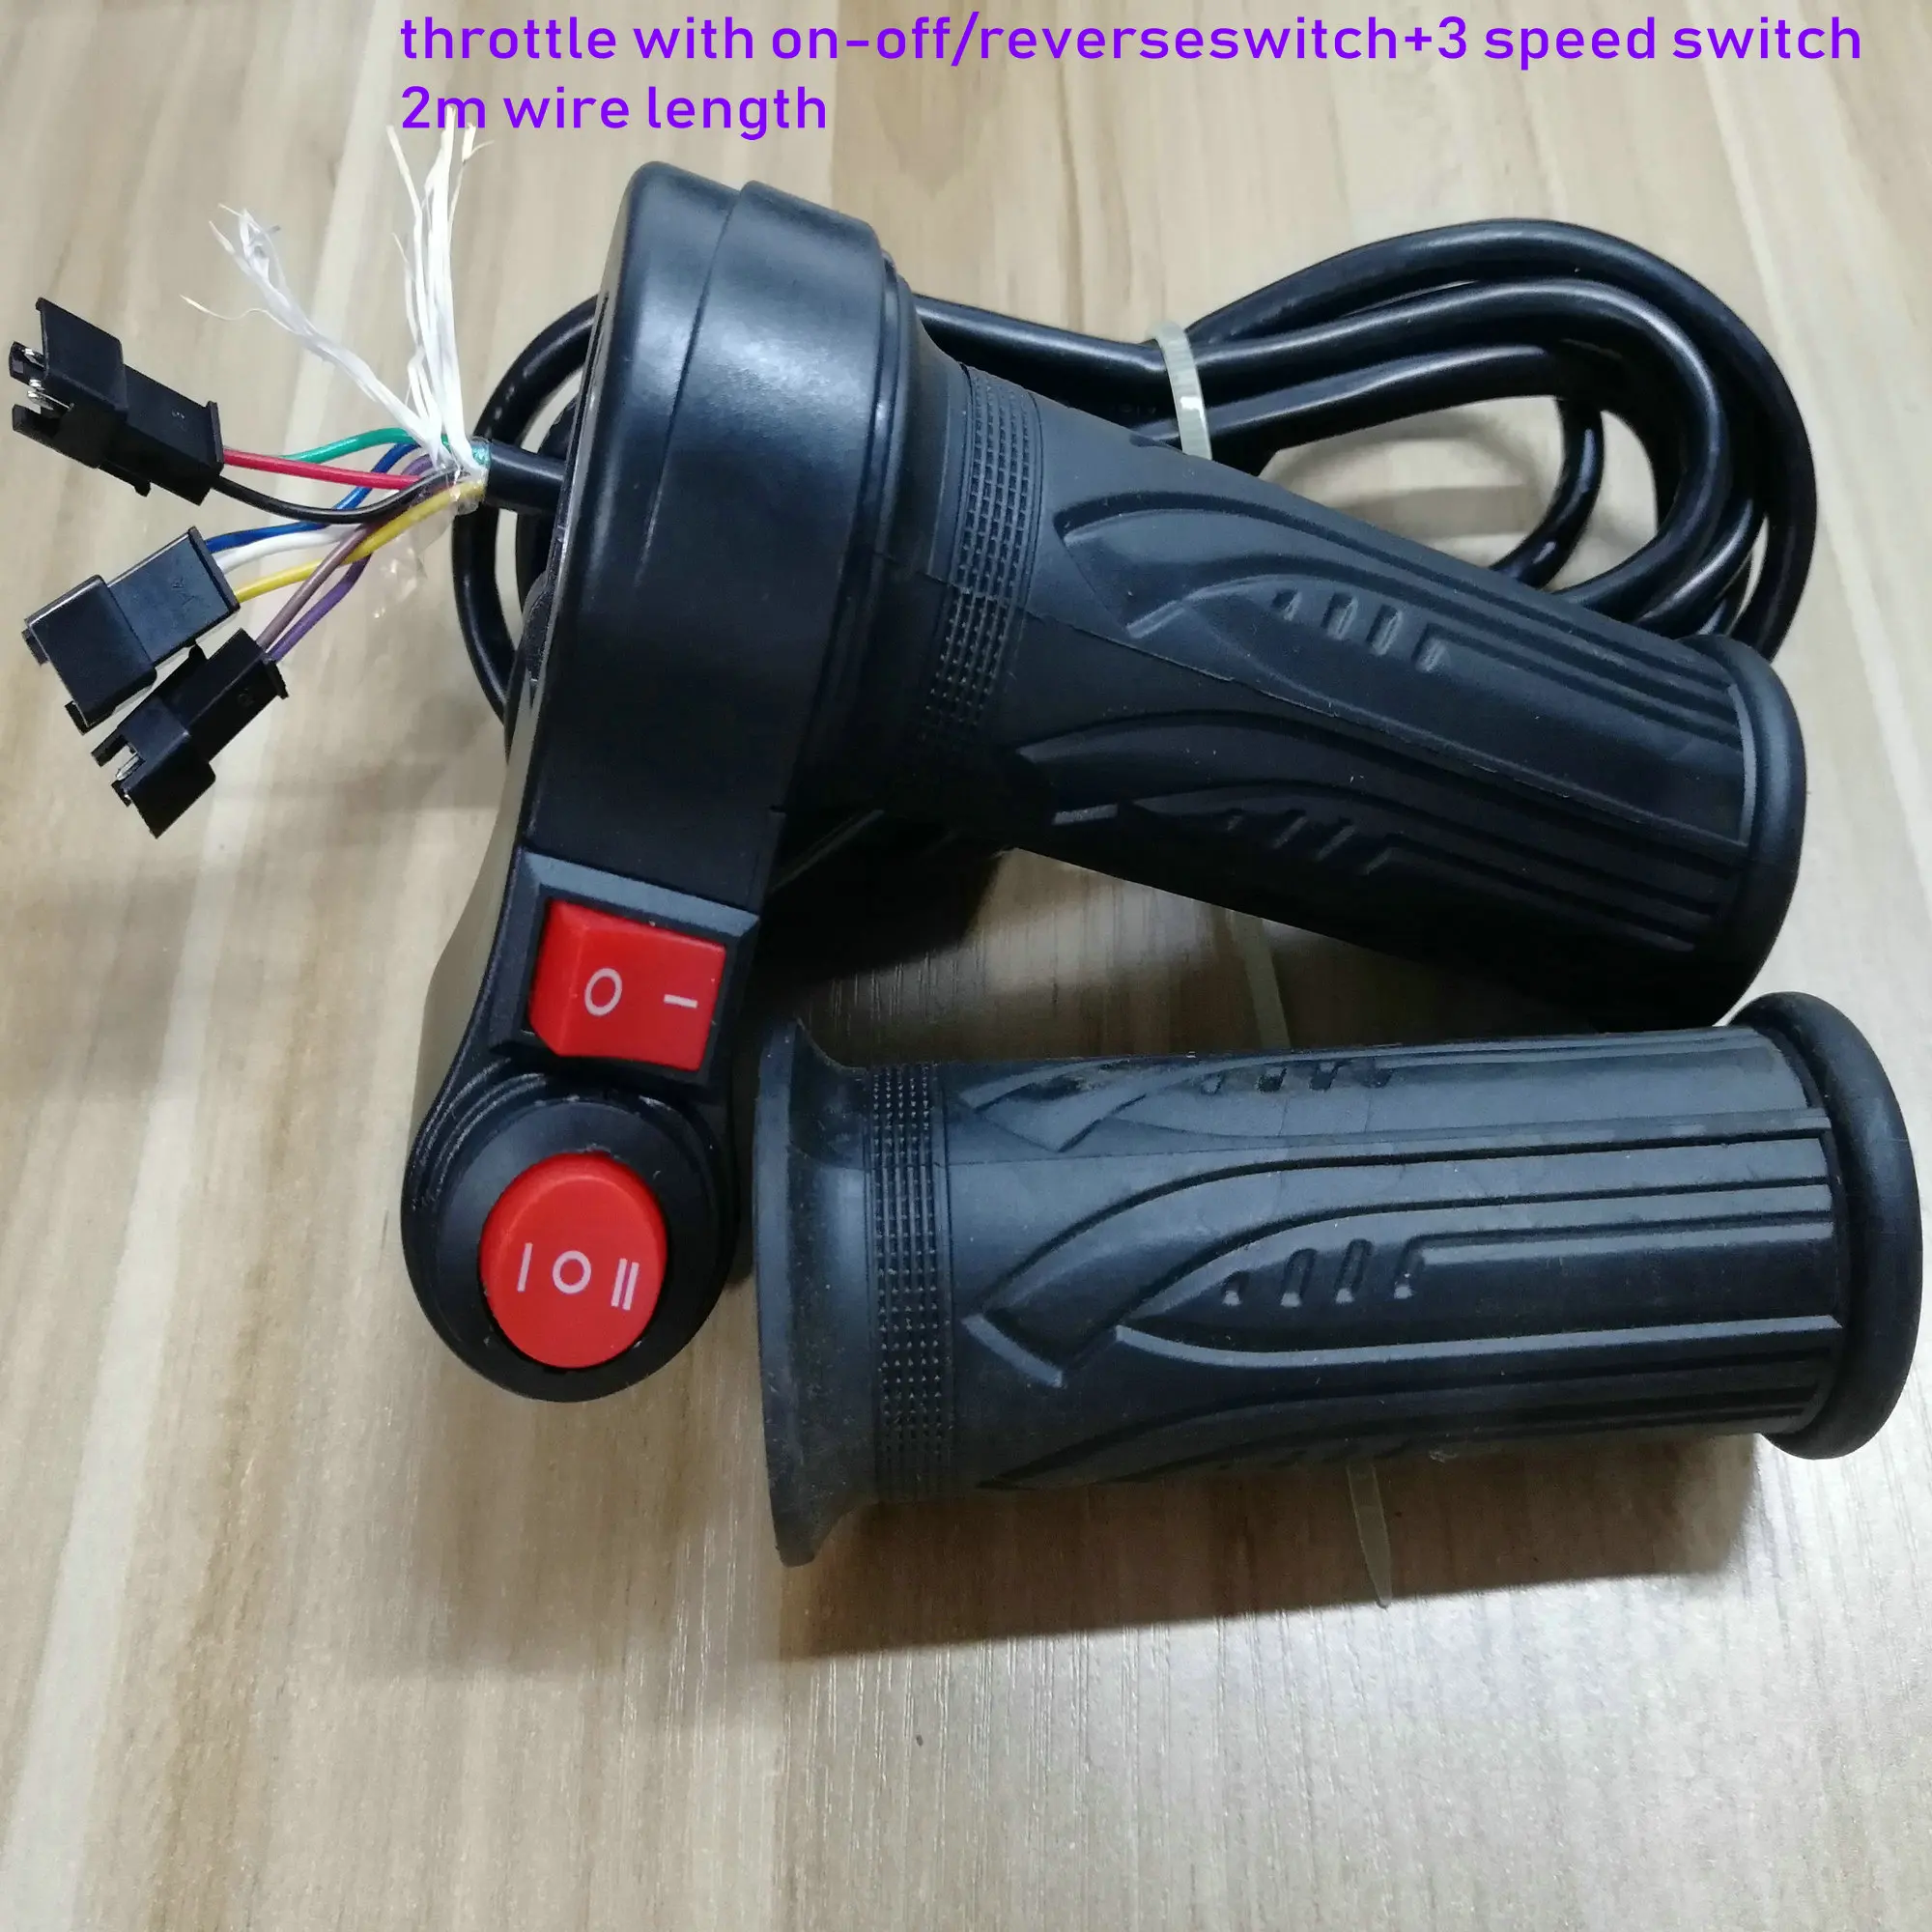 Cheap handlebar twist throttle gas handle with forward/reverse switch+3 gears/cruise switch electric bike scooter tricycle parts grips 5